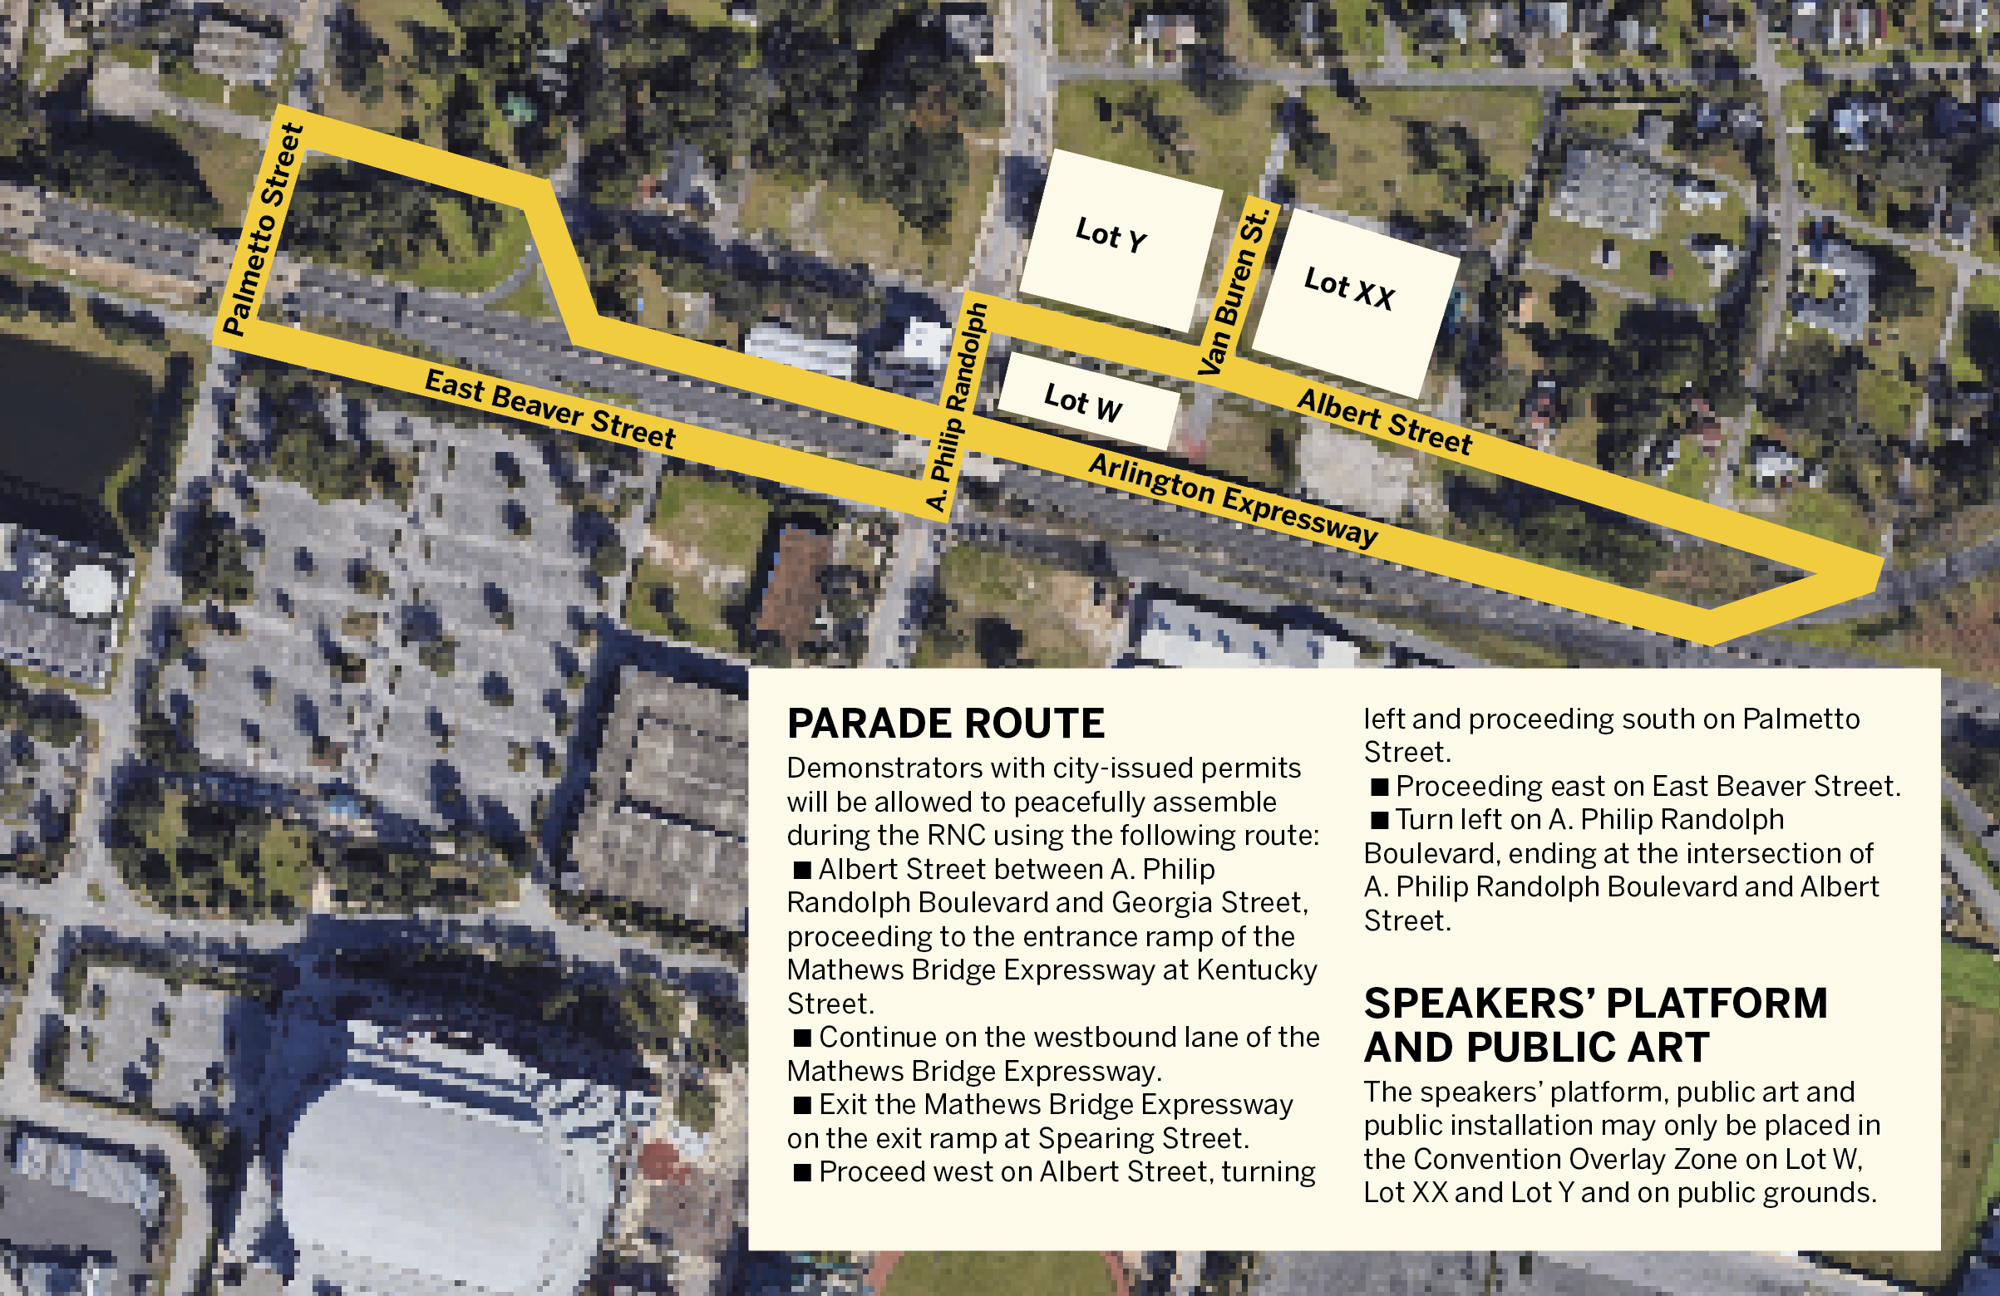 This is a map created by the Daily Record of the parade route and speakers' platform areas.